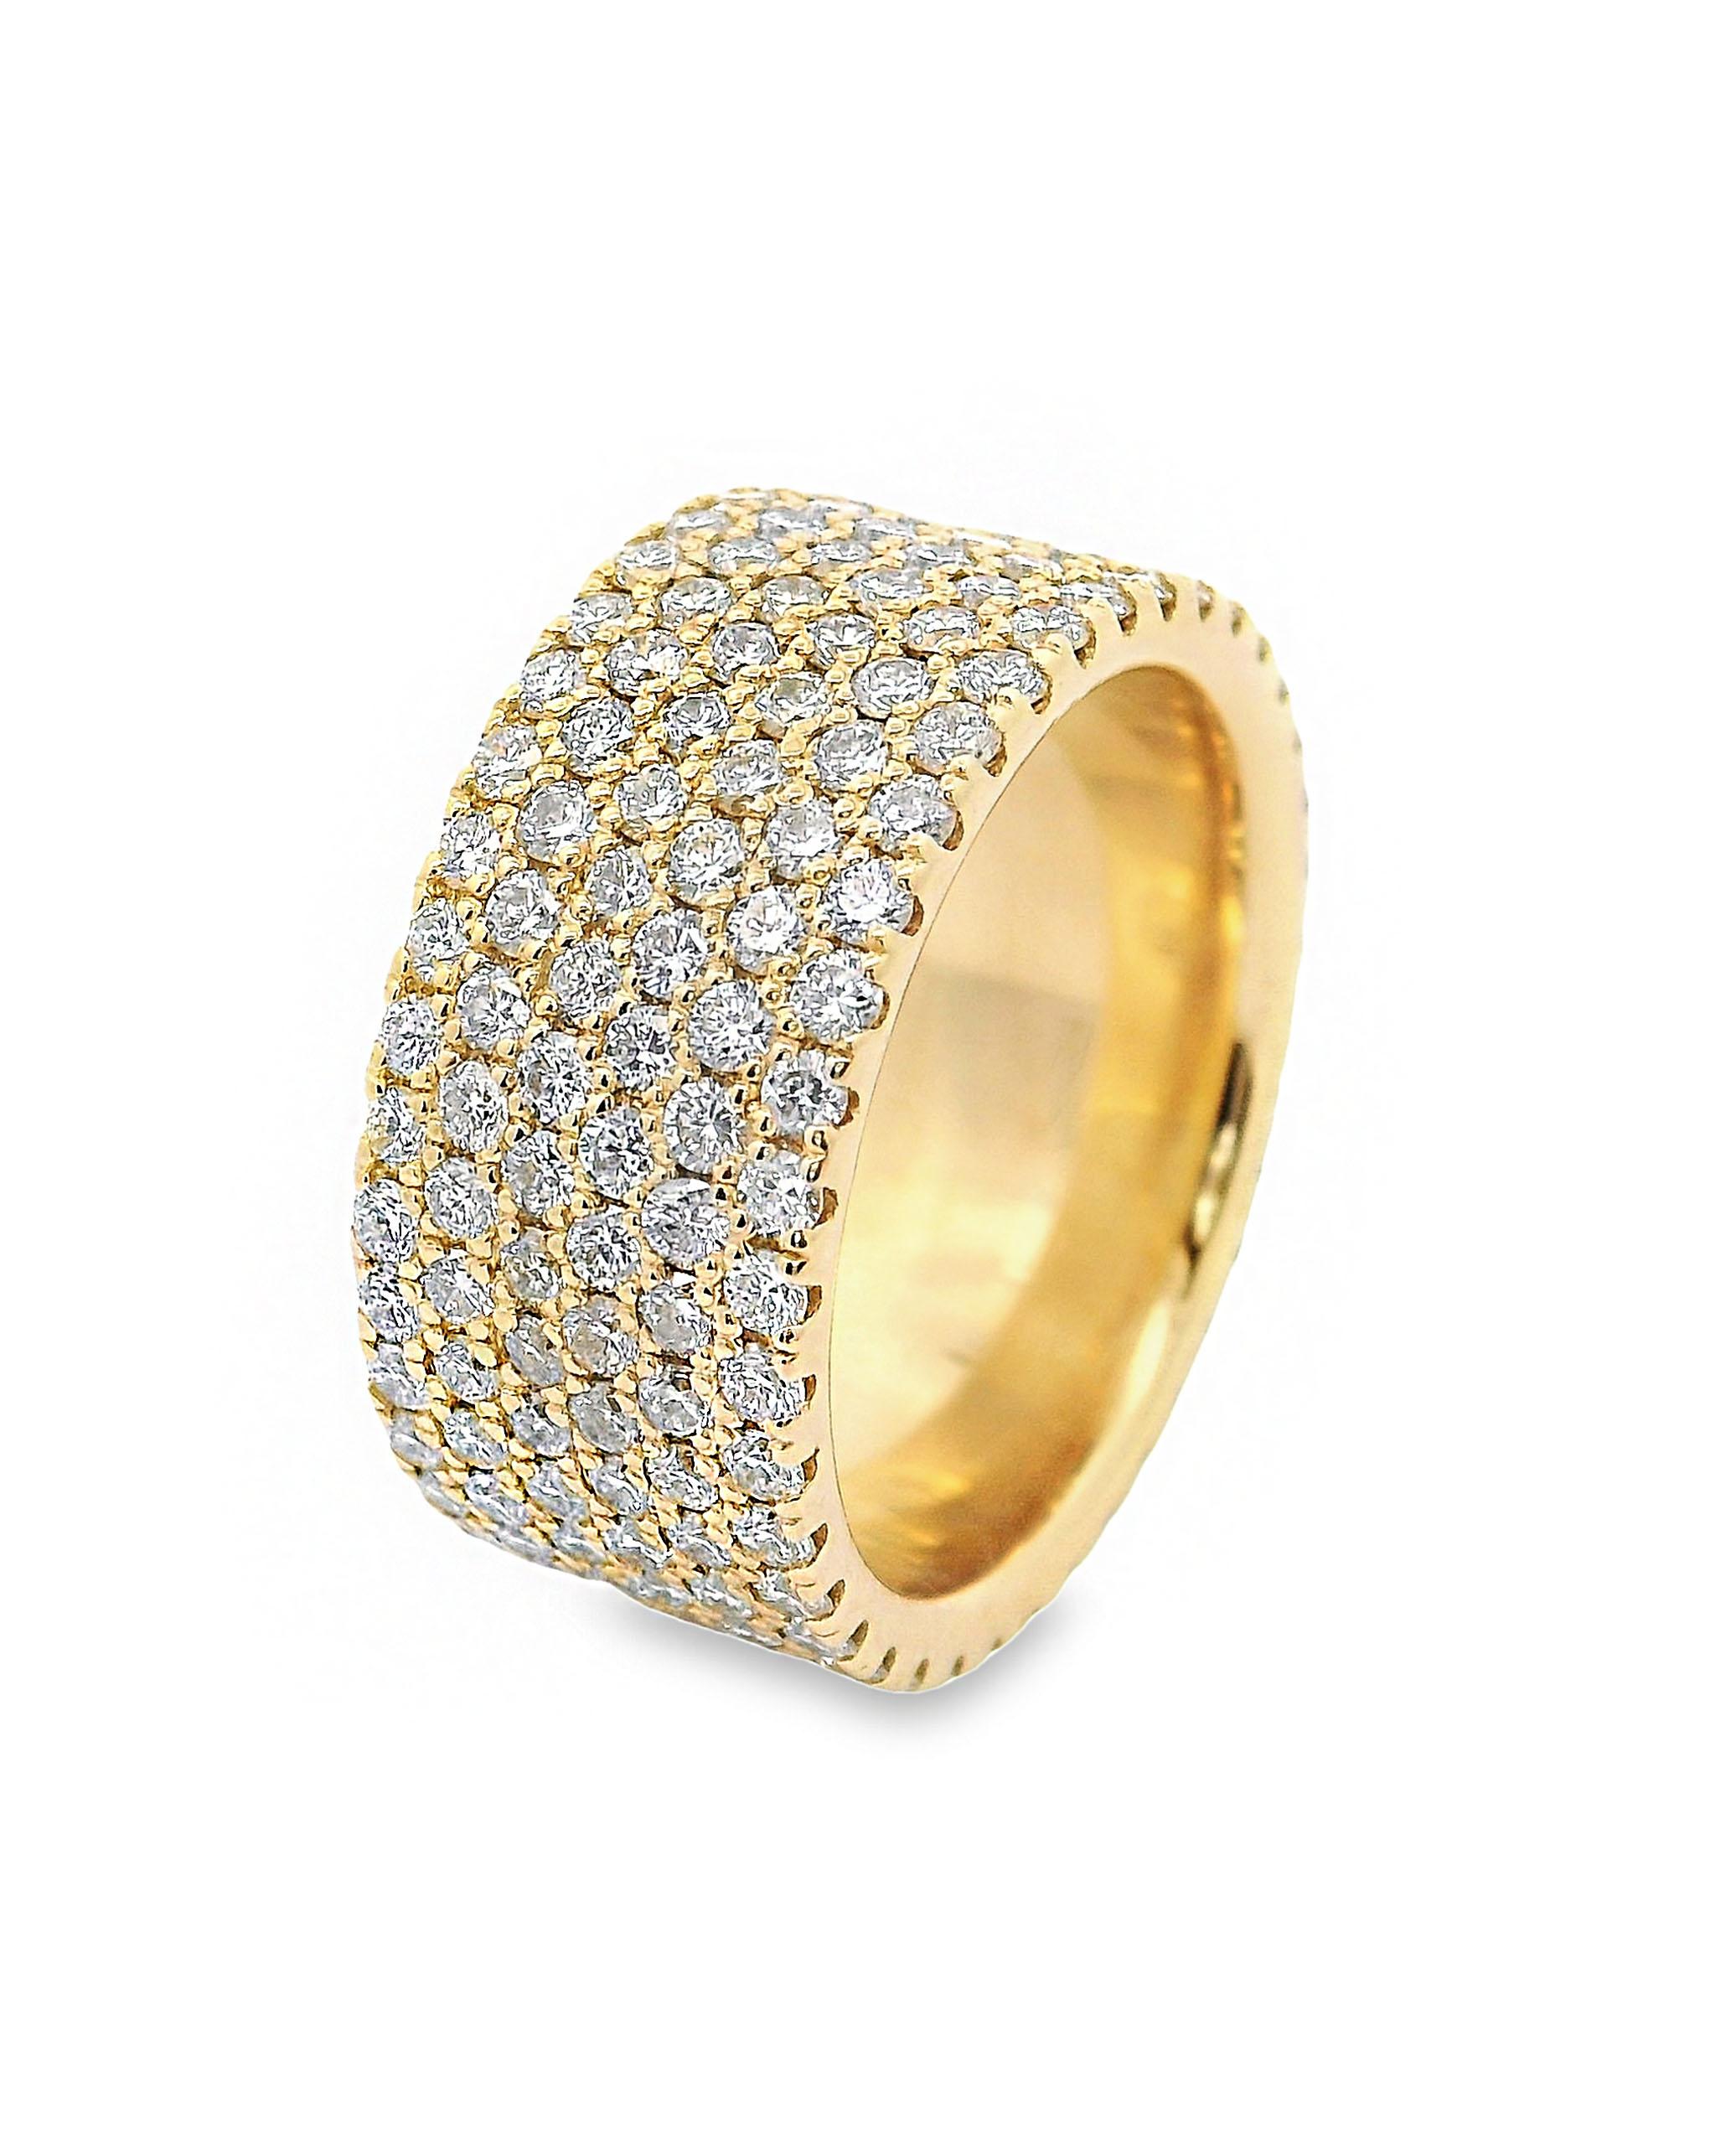 14K yellow gold eternity ring with 6 rows of round brilliant-cut pave set diamonds weighing 3.40 carats total.

- Finger size 6
- 9mm wide
- Diamonds are G/H color, SI1 clarity